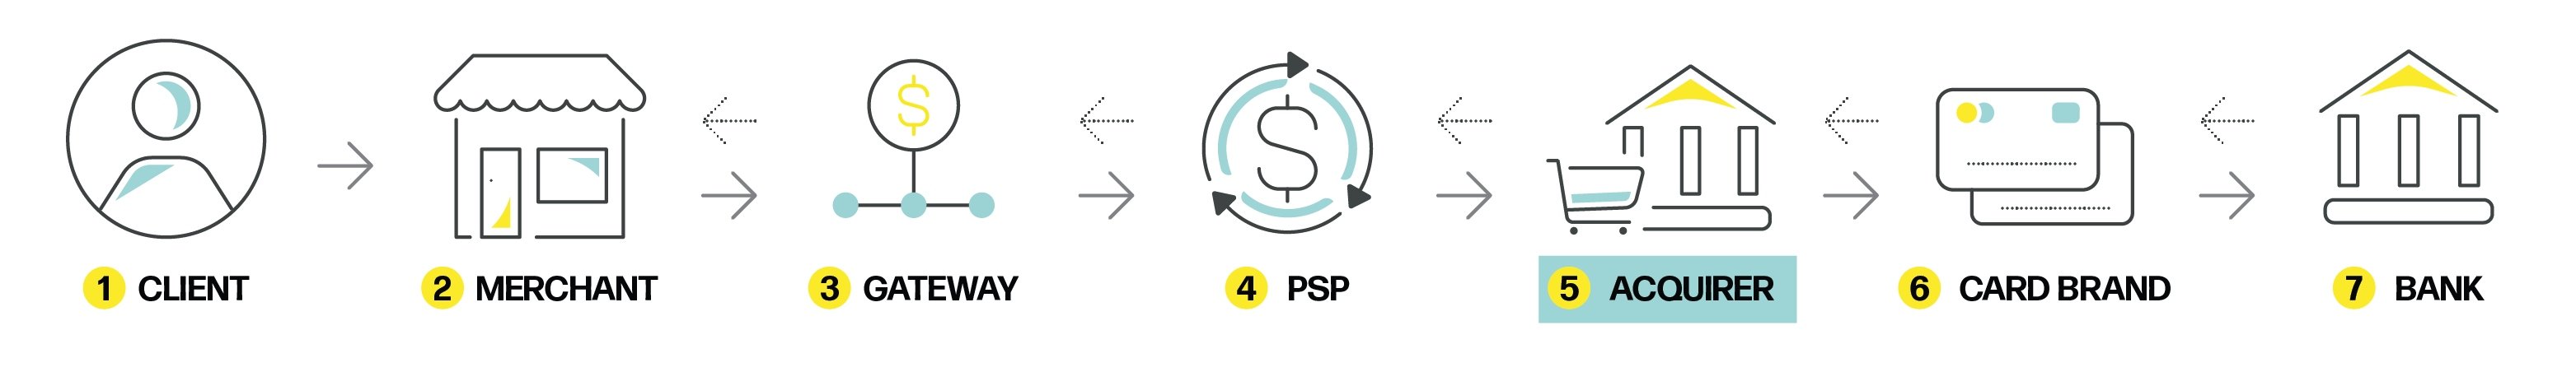 payment_flow_with_psp_and_acquirer